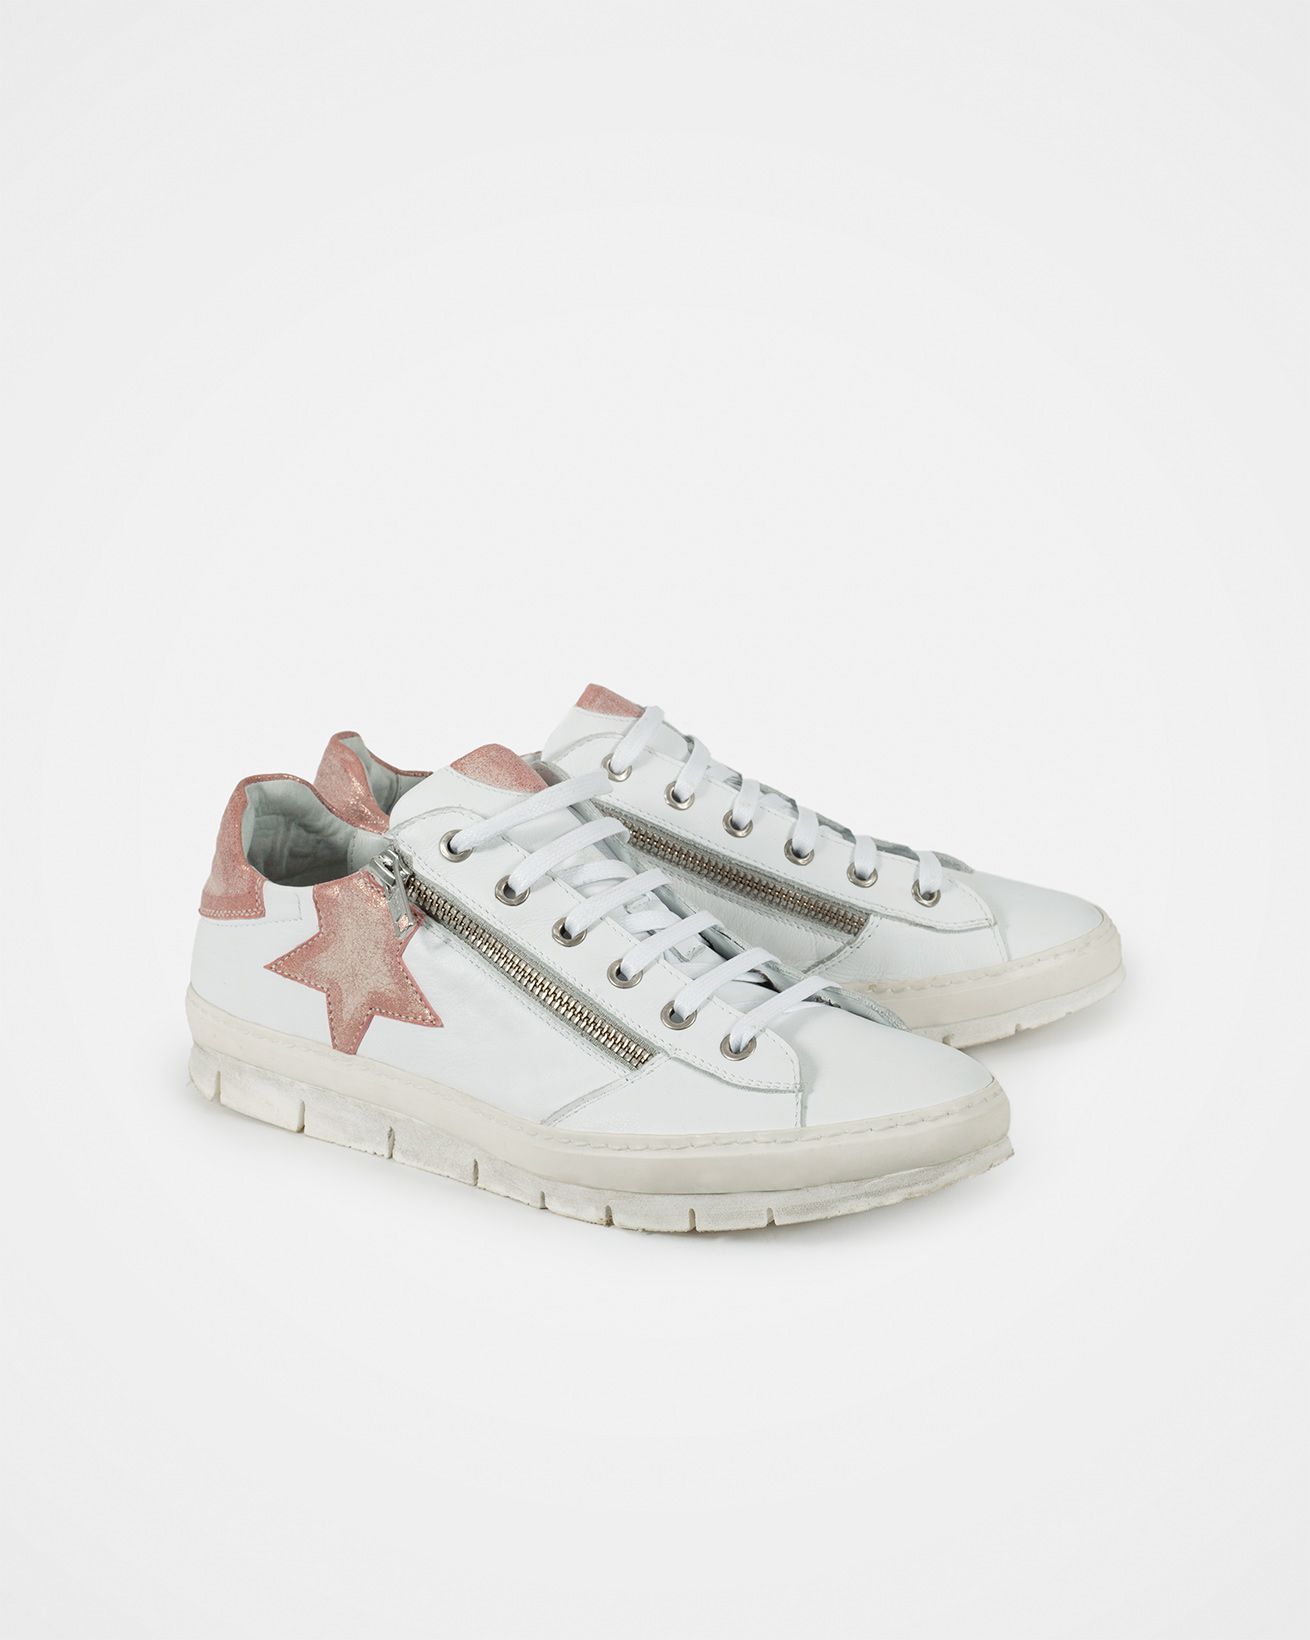 Embellished Trainers / White, Antique Rose / 40